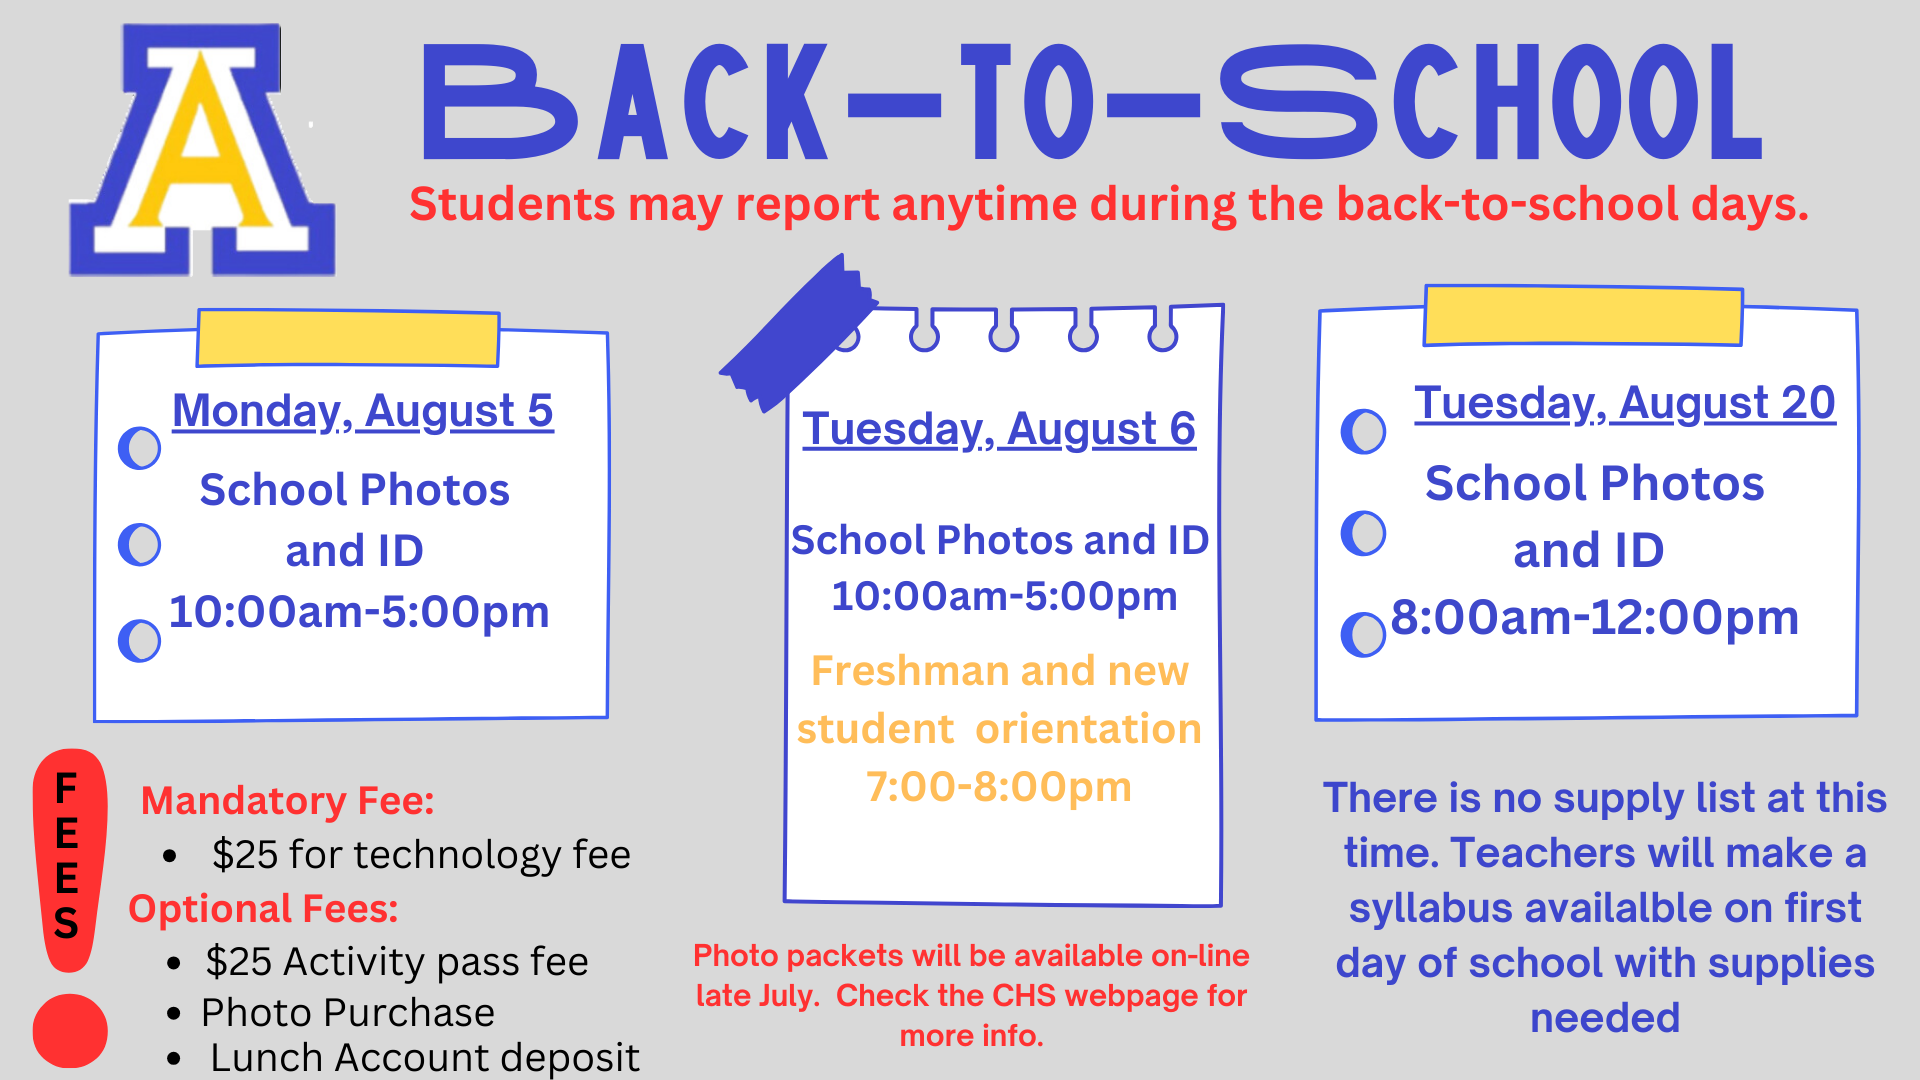 CHS Back to School Days graphic: Students may report anytime during the back-to-school days. Monday, Aug. 5: School photos and ID 10 a.m.-5 p.m.; Tuesday, Aug. 6: School photos and ID 10 a.m.-5 p.m., freshman and new student orientation 7-8 p.m.; Tuesday, Aug. 20: School photos and ID 8 a.m.-noon; Mandatory $25 technology fee; optional fees: $25 activity pass; photo purchase; lunch account deposit. Photo packets will be available online in late July - check CHS webpage.